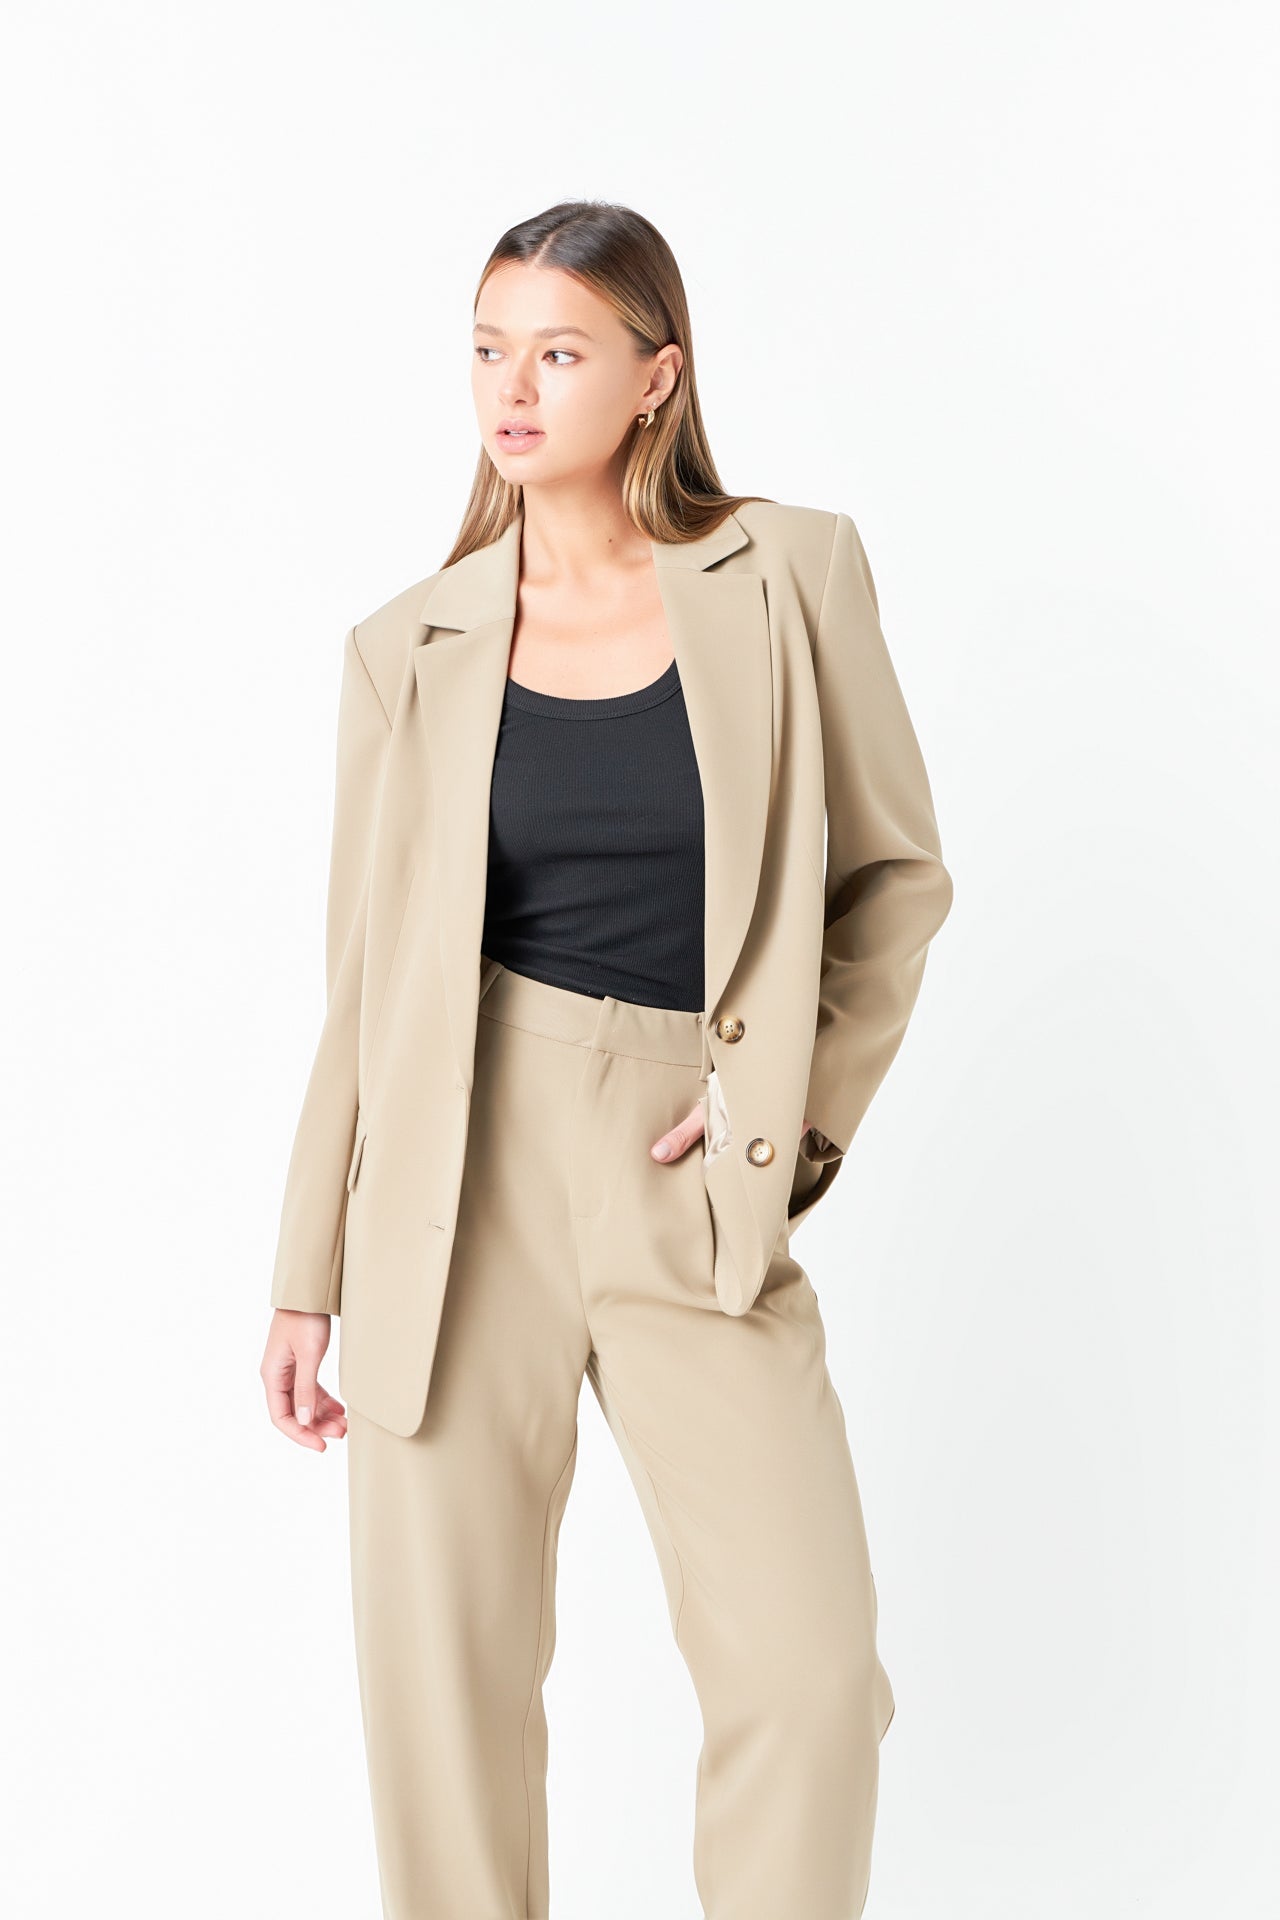 GREY LAB - Single Breasted Oversized Blazer - JACKETS available at Objectrare